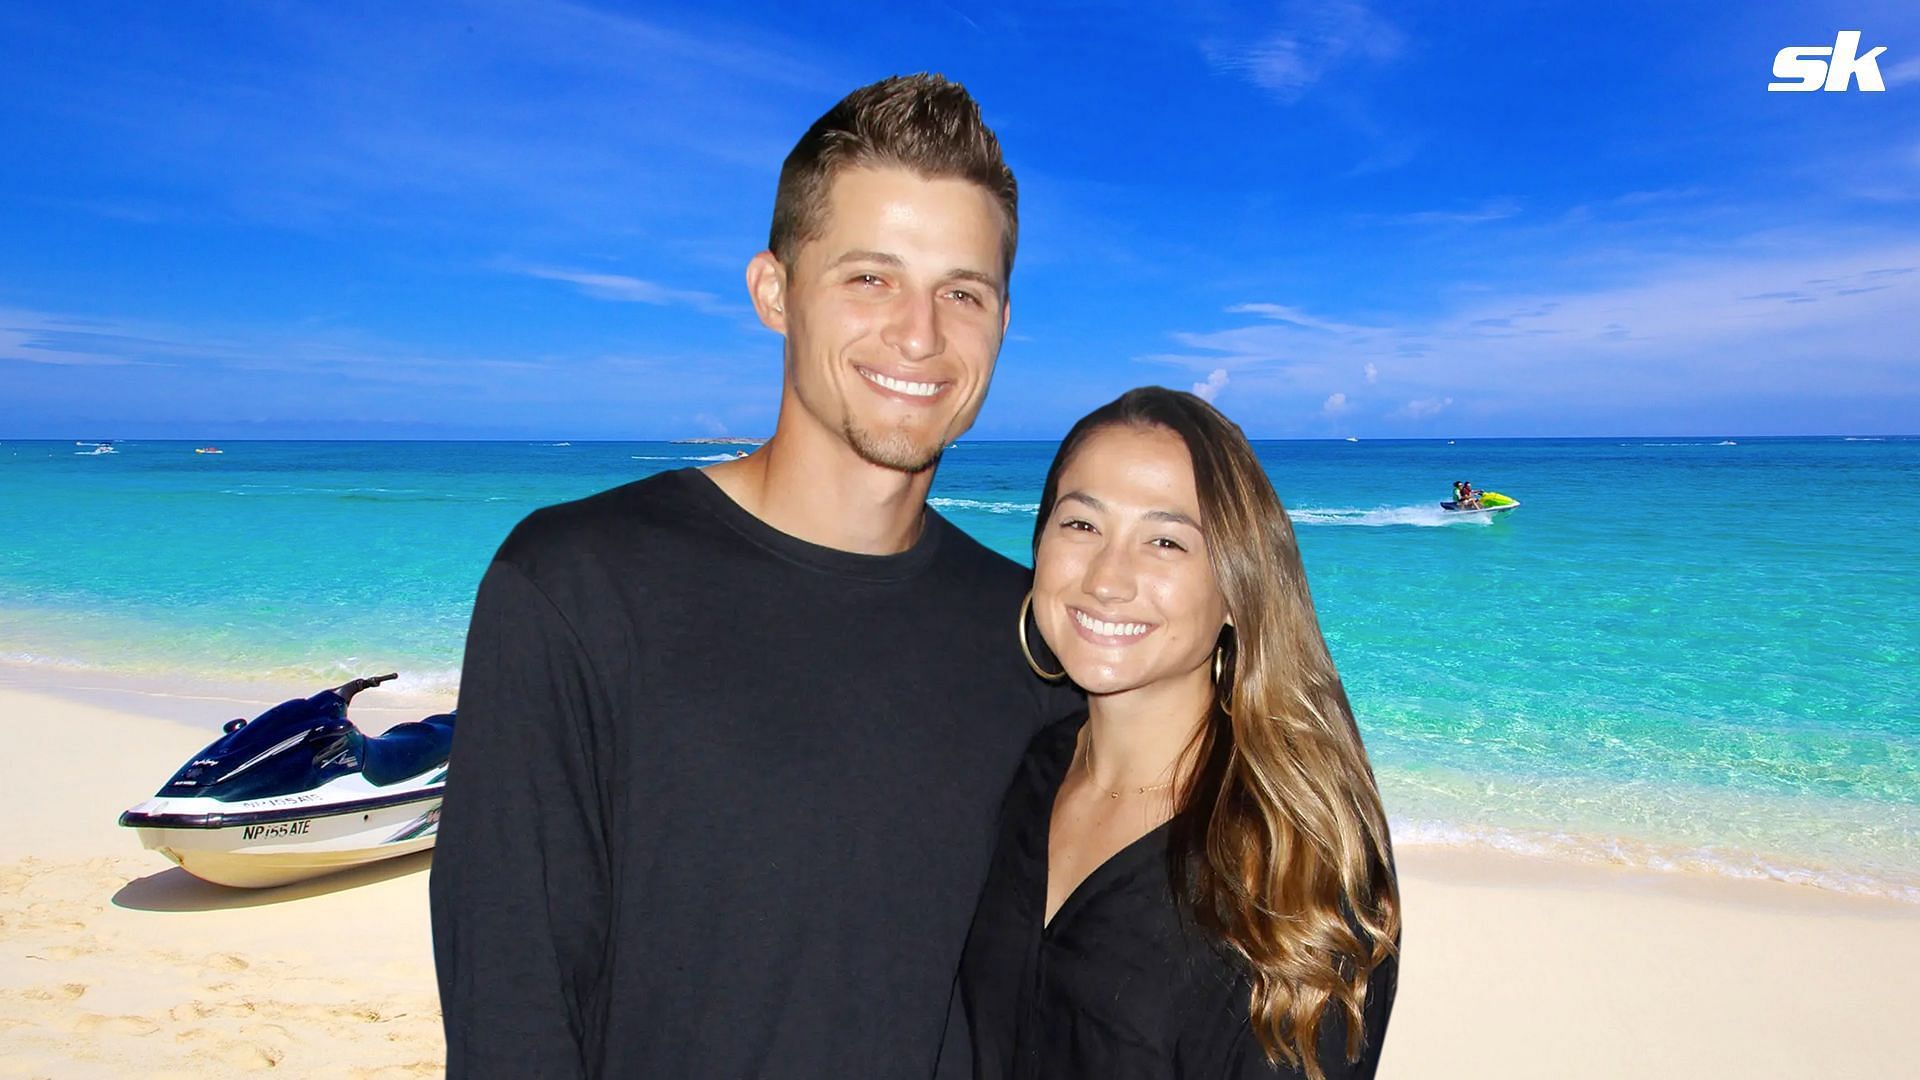 In Photos: World Series MVP Corey Seager and wife Madisyn